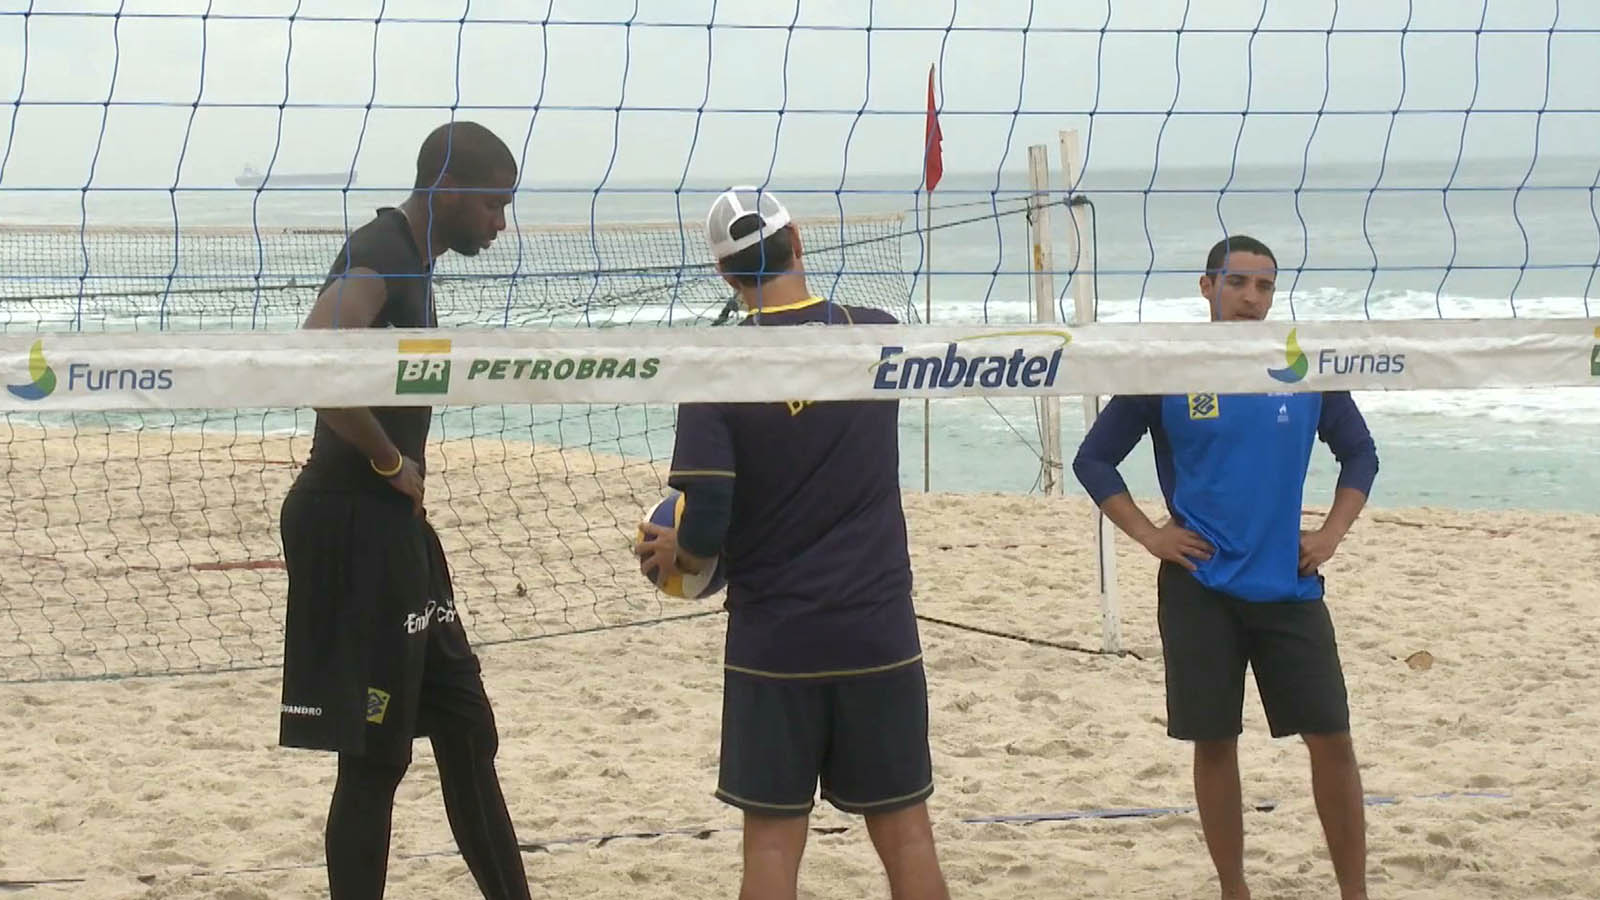 Brazil hopes to win gold in beach volleyball during Olympics